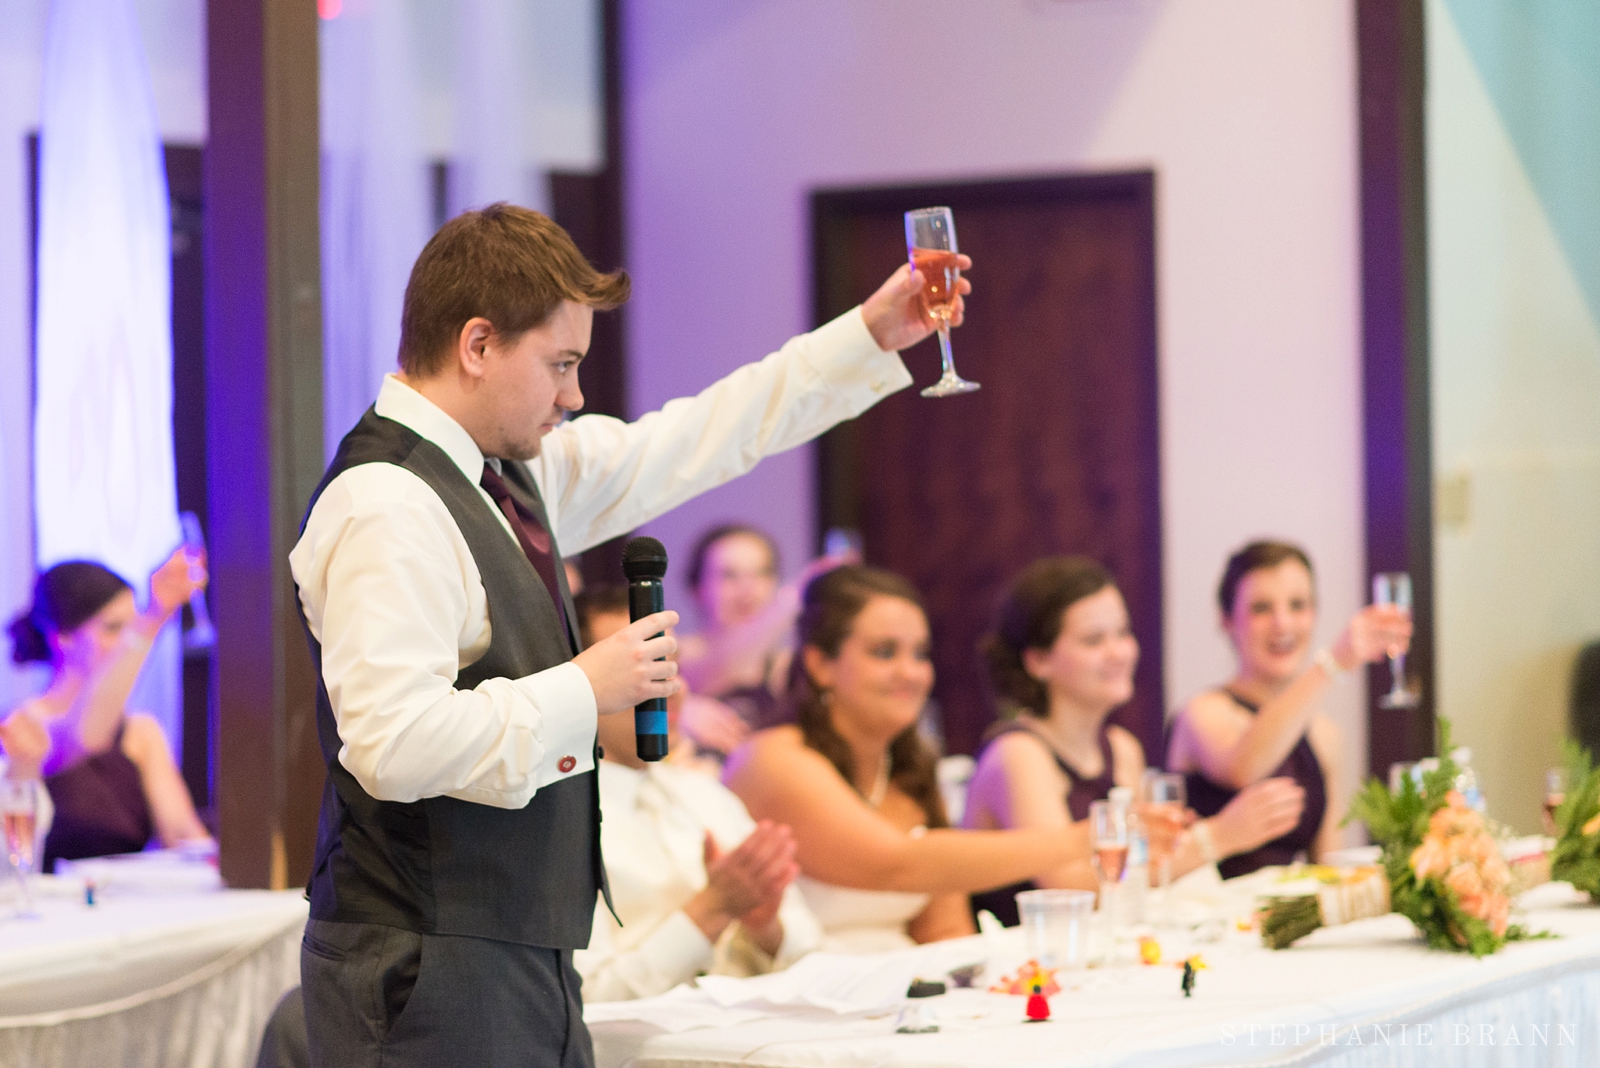 guy holds up glass for a toast